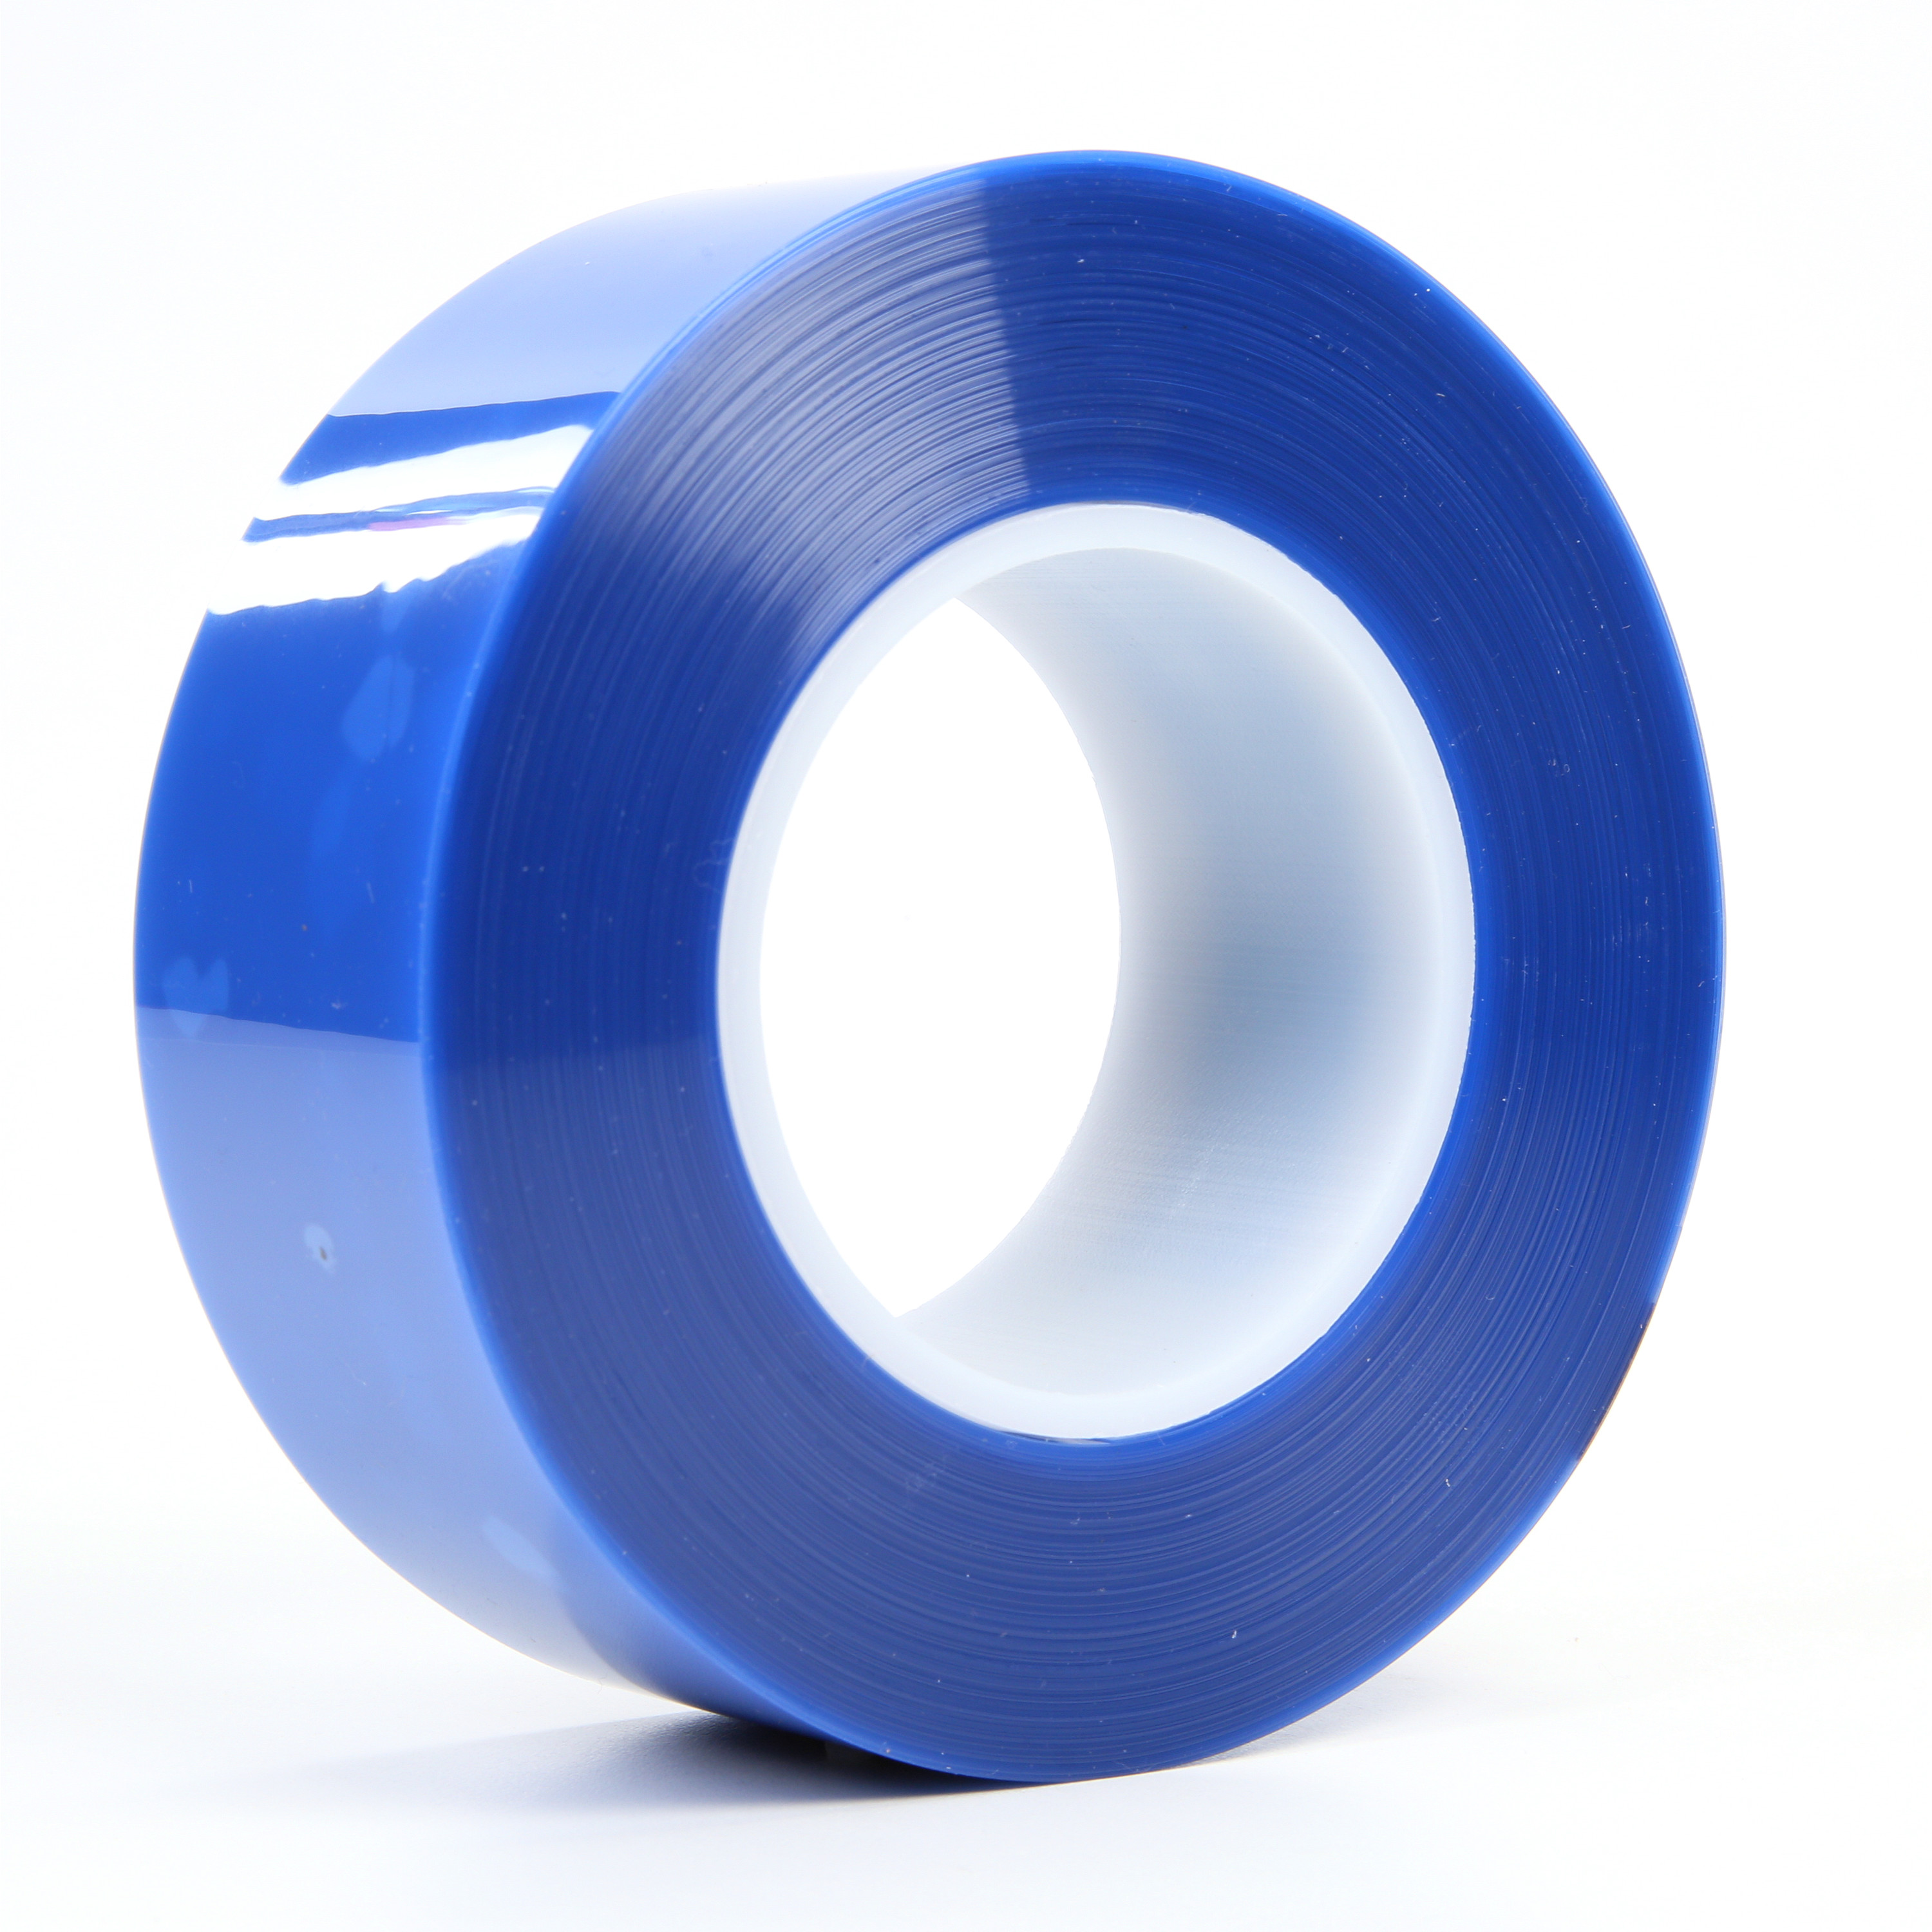 3M™ Polyester Tape 8905, Blue, 2 in x 72 yd, 6.4 mil, 24 rolls per case